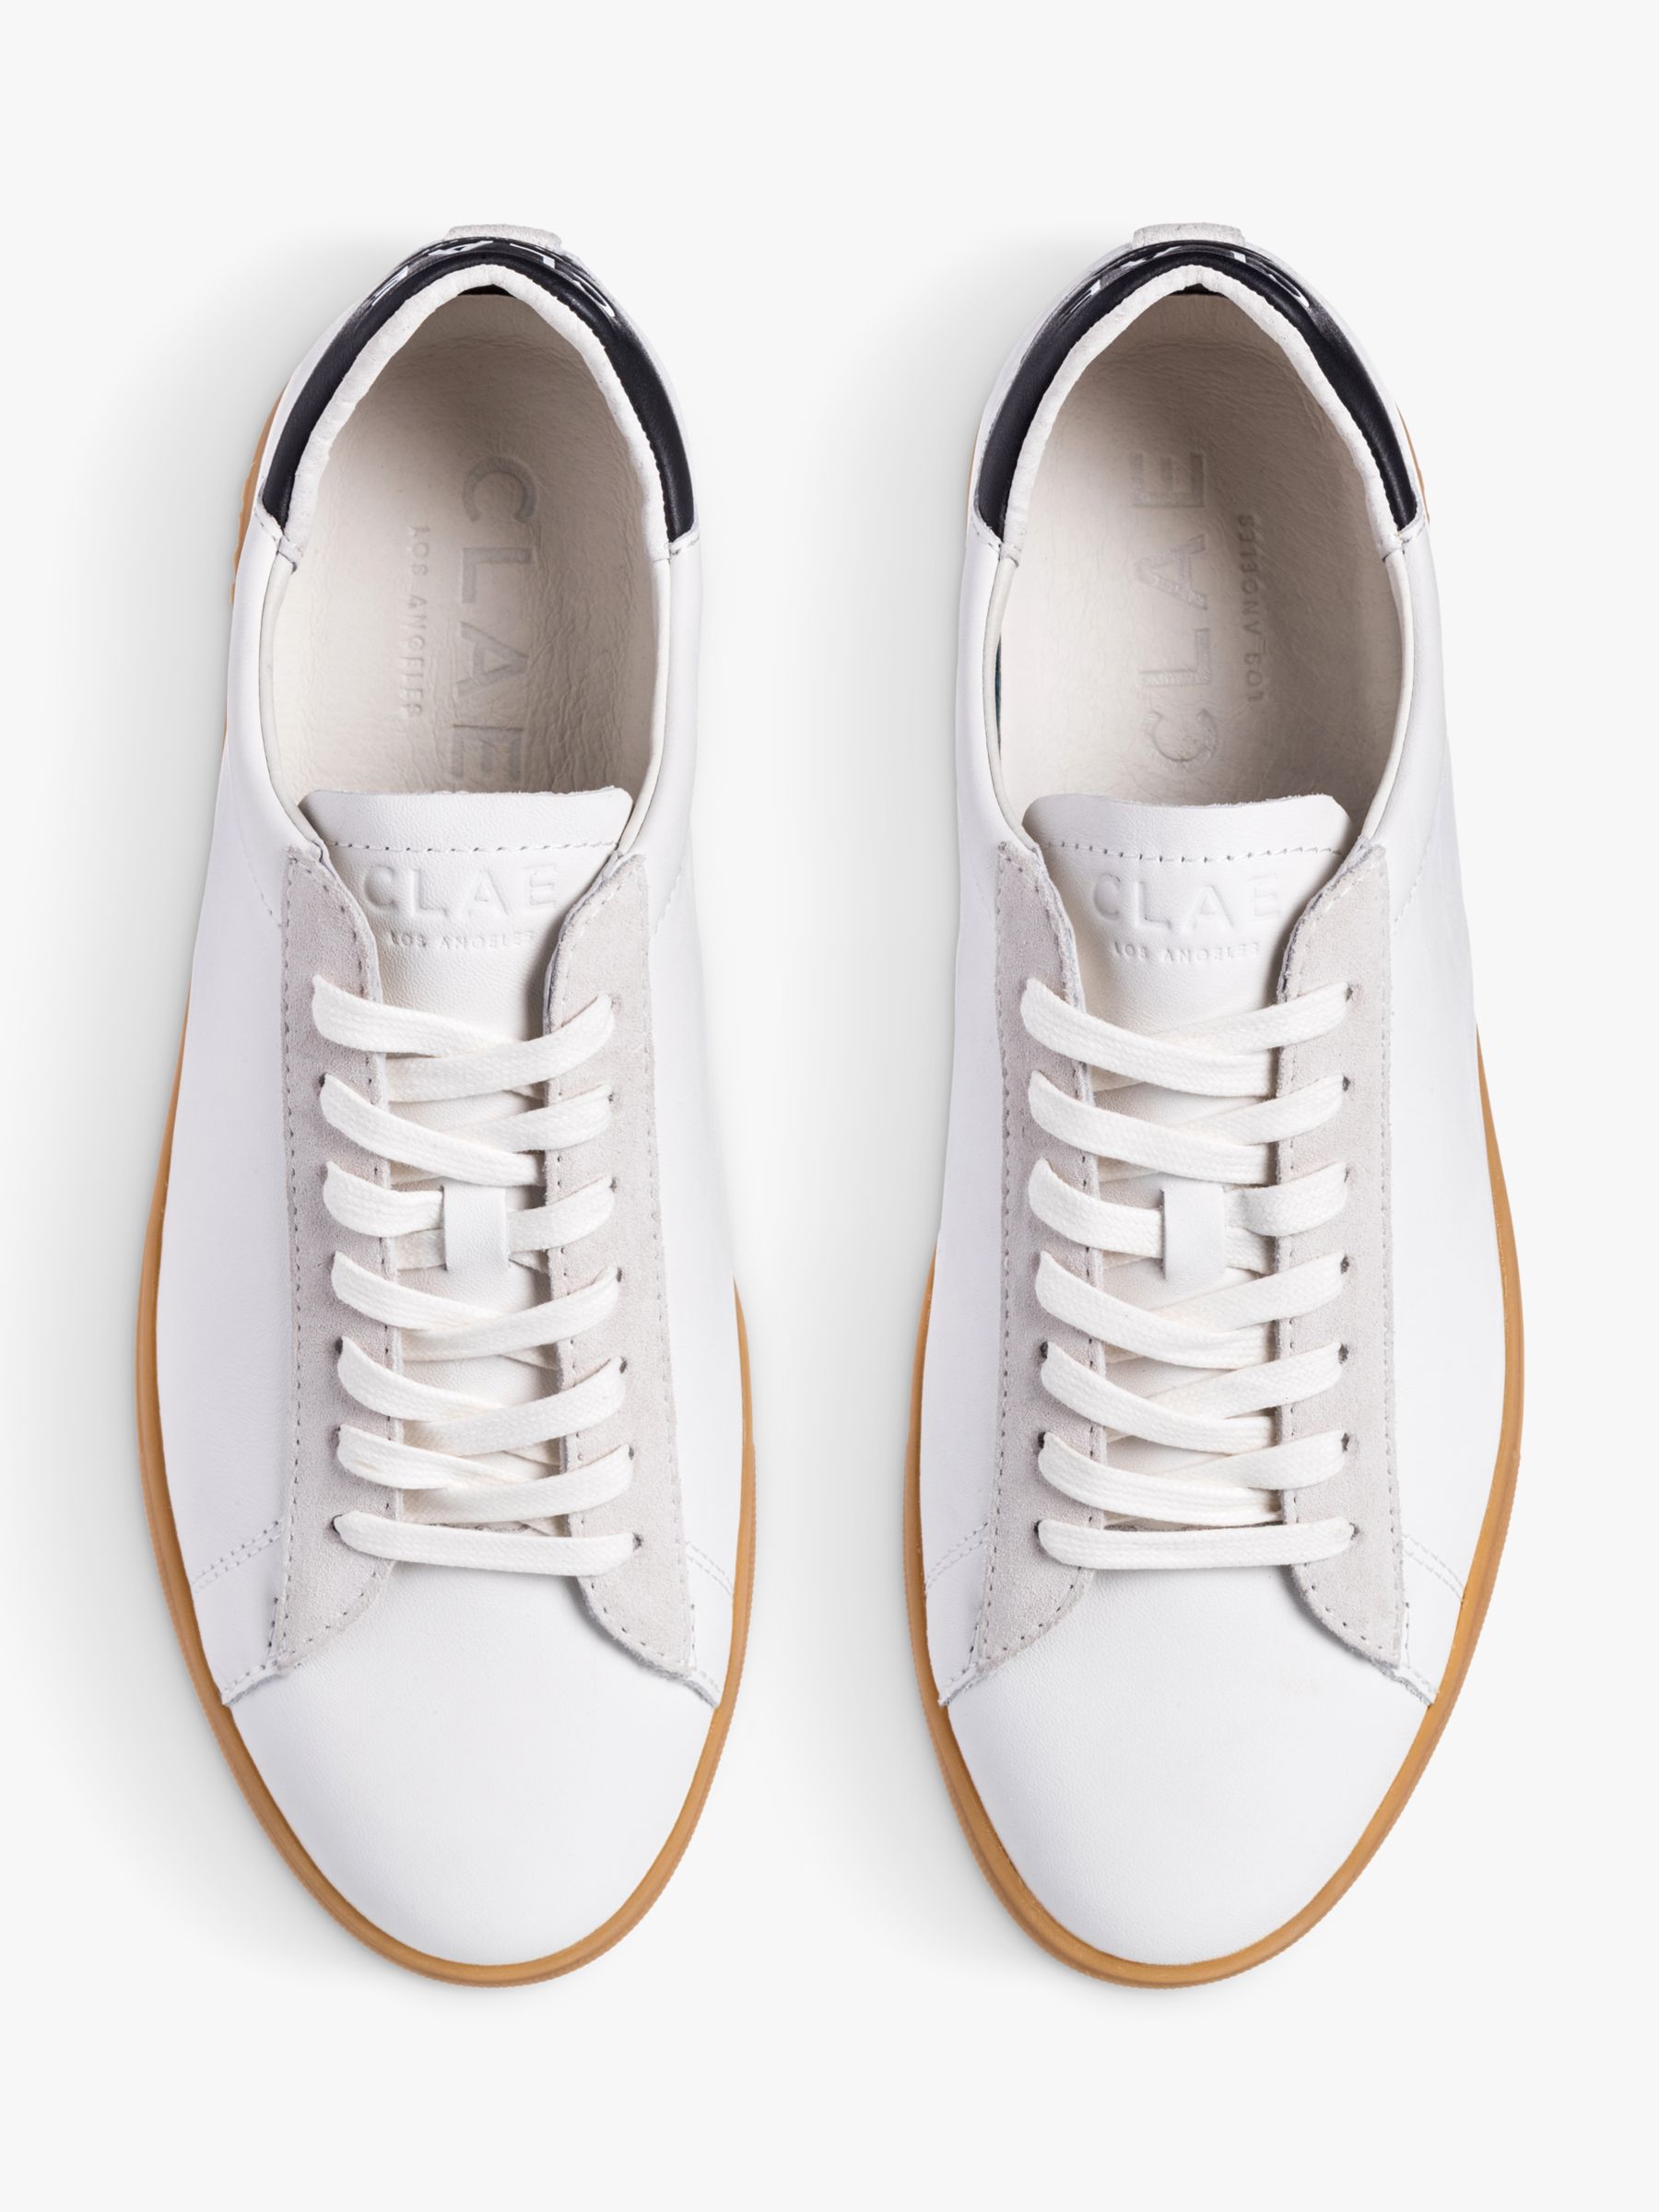 Buy CLAE Bradley Leather Lace Up Trainers Online at johnlewis.com